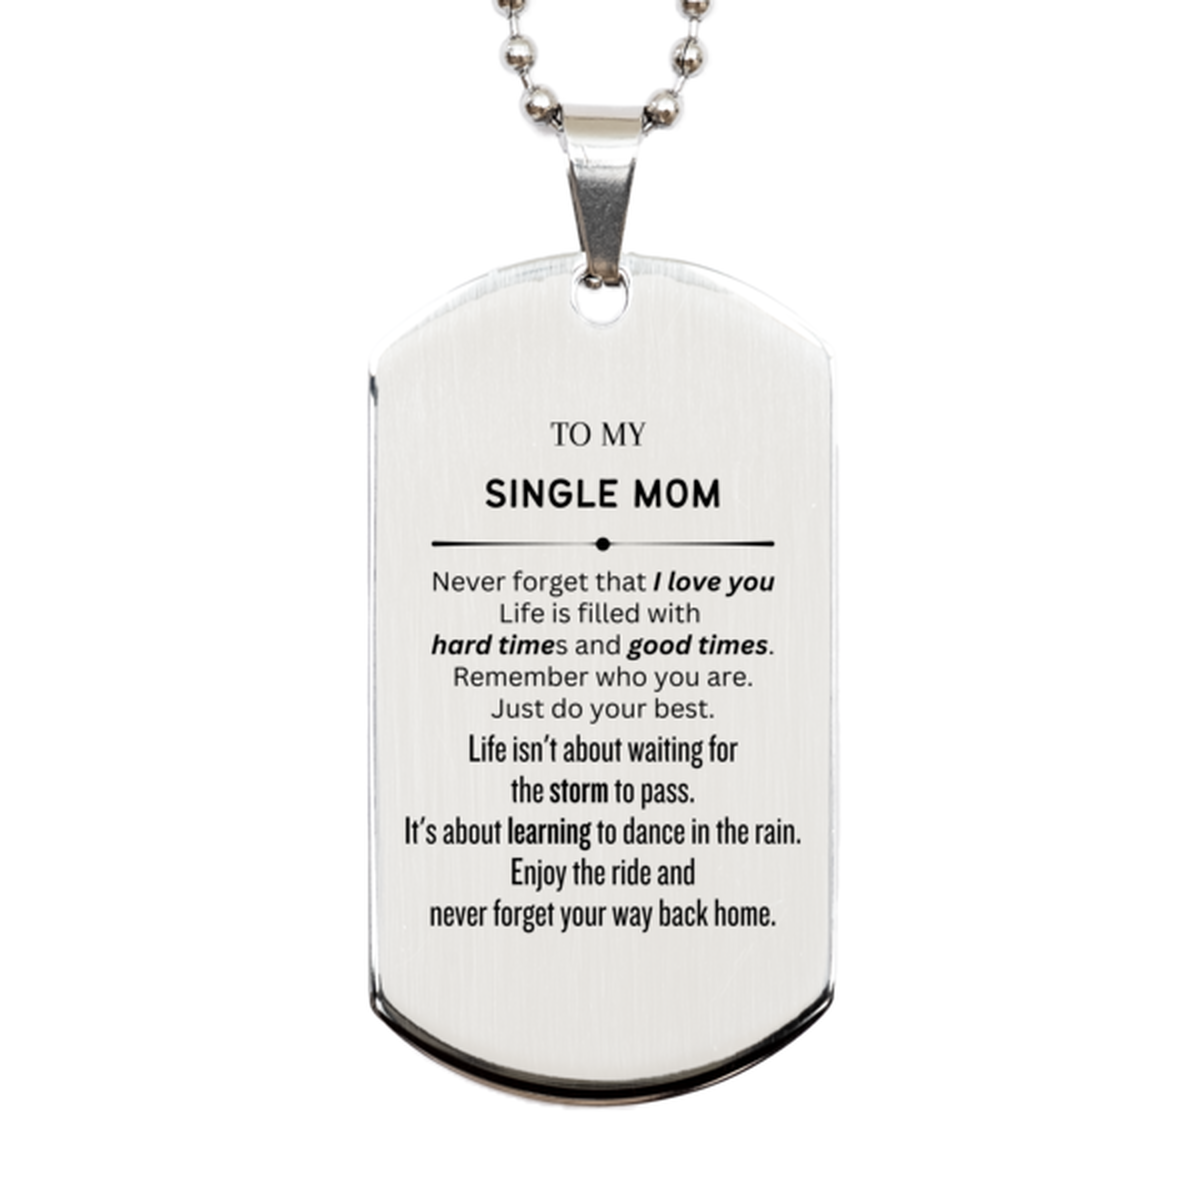 Christmas Single Mom Silver Dog Tag Gifts, To My Single Mom Birthday Thank You Gifts For Single Mom, Graduation Unique Gifts For Single Mom To My Single Mom Never forget that I love you life is filled with hard times and good times. Remember who you are.